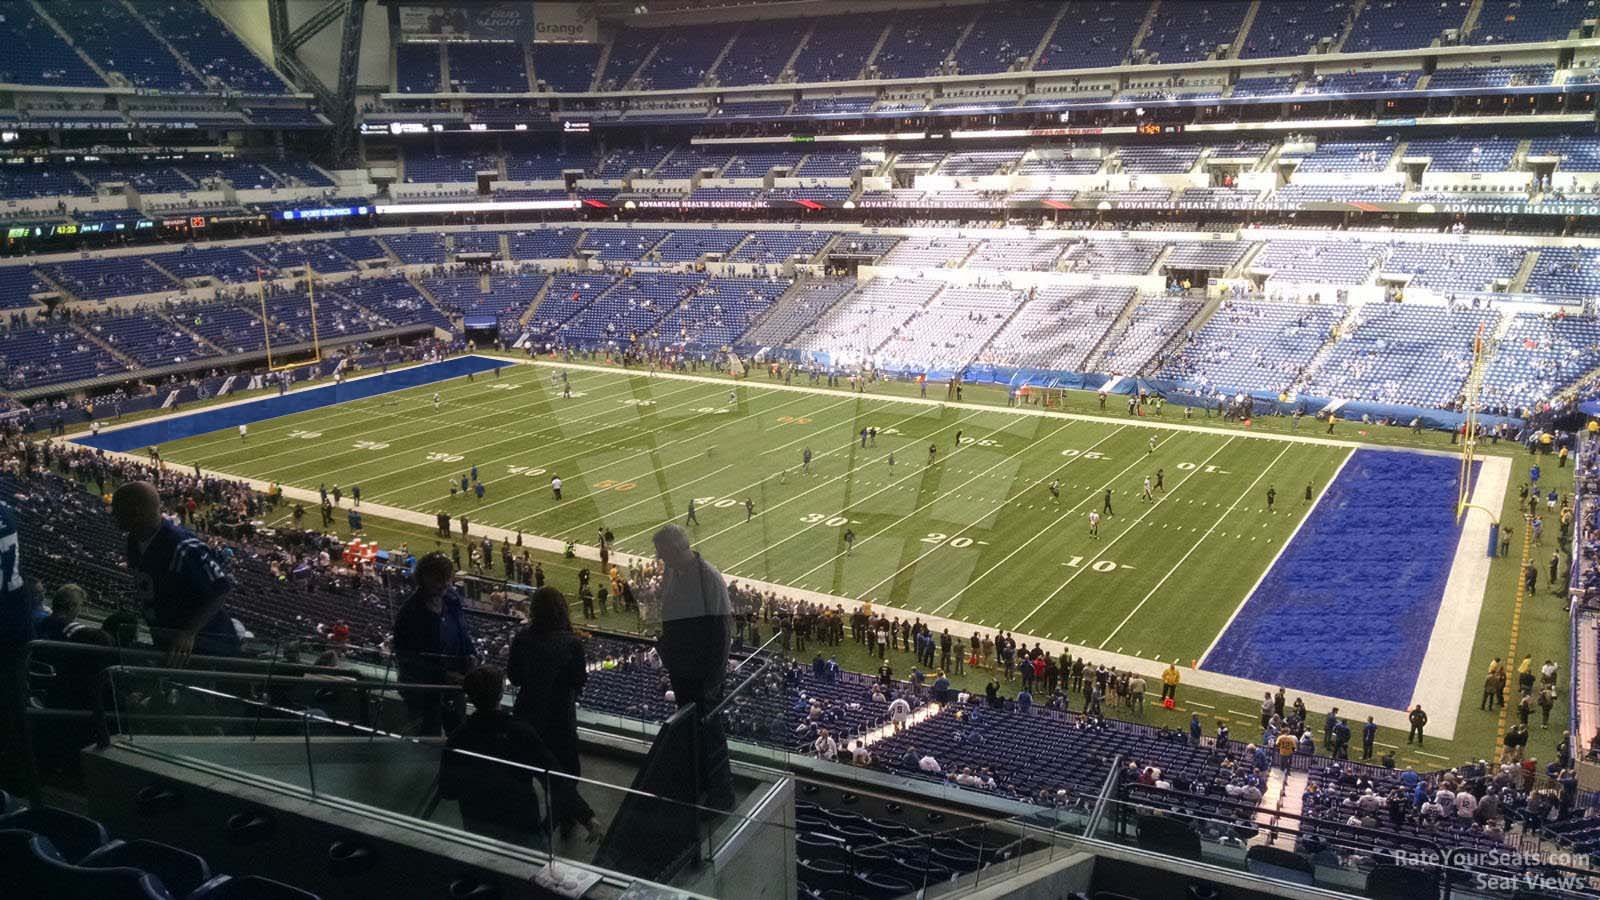 section 408, row 8 seat view  for football - lucas oil stadium